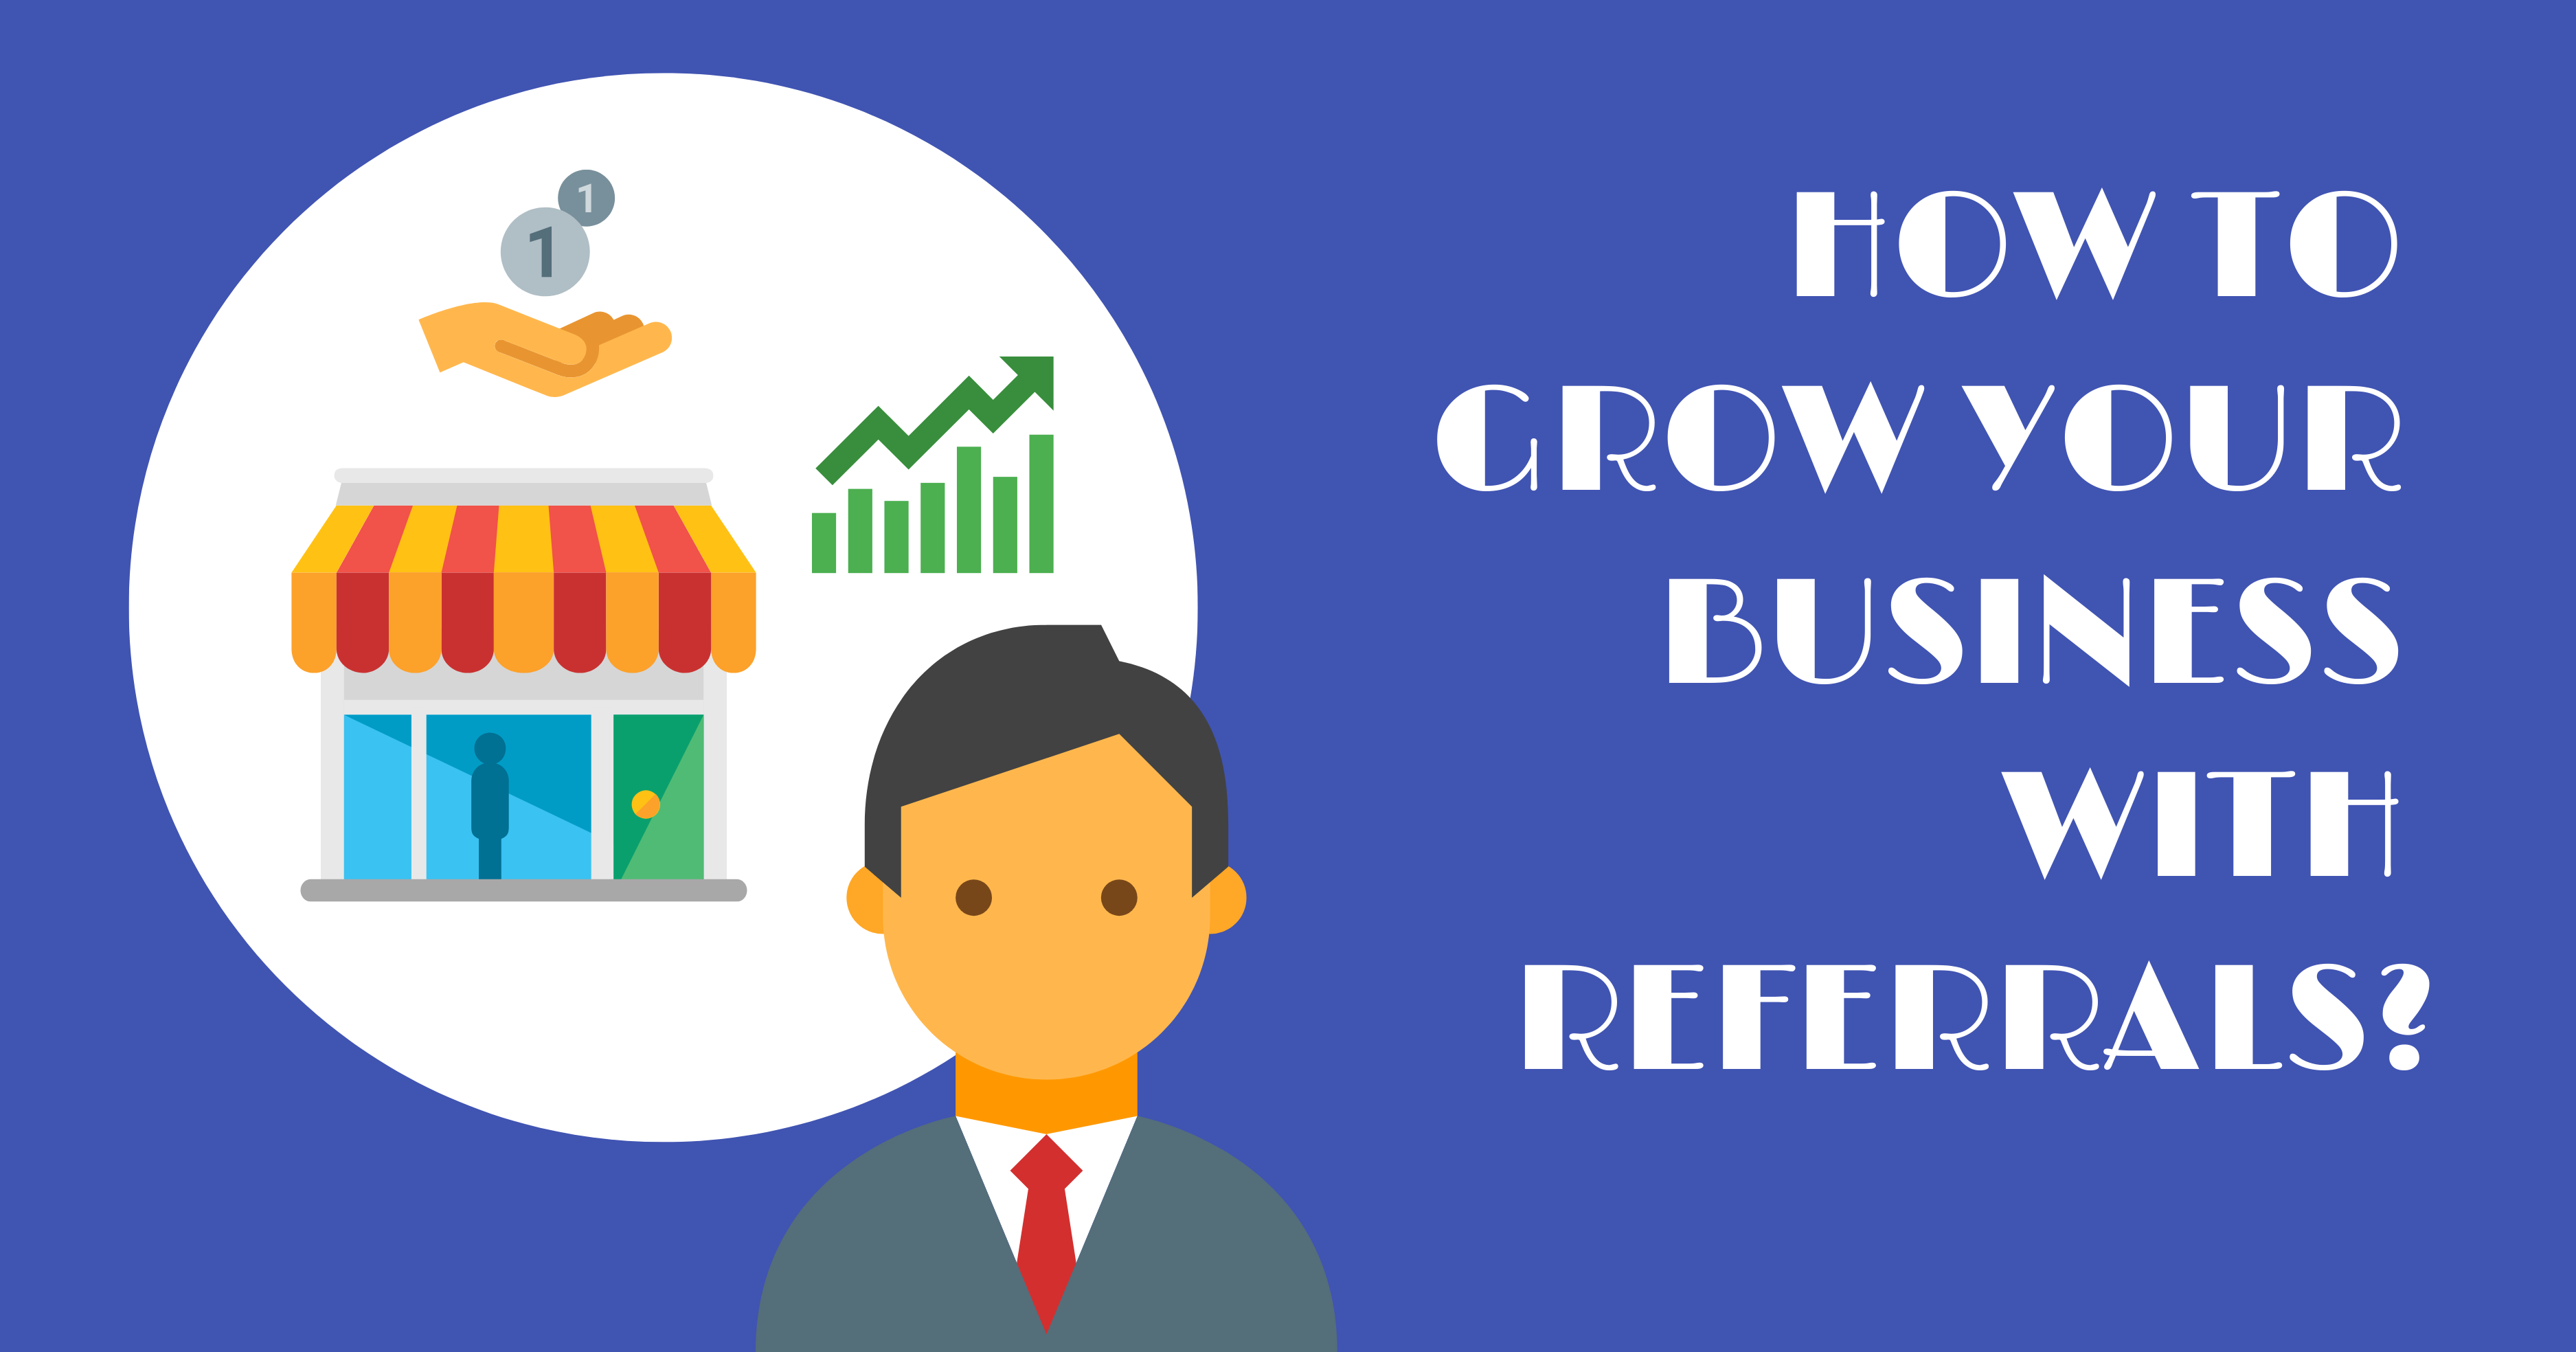 Grow your business with referrals_L